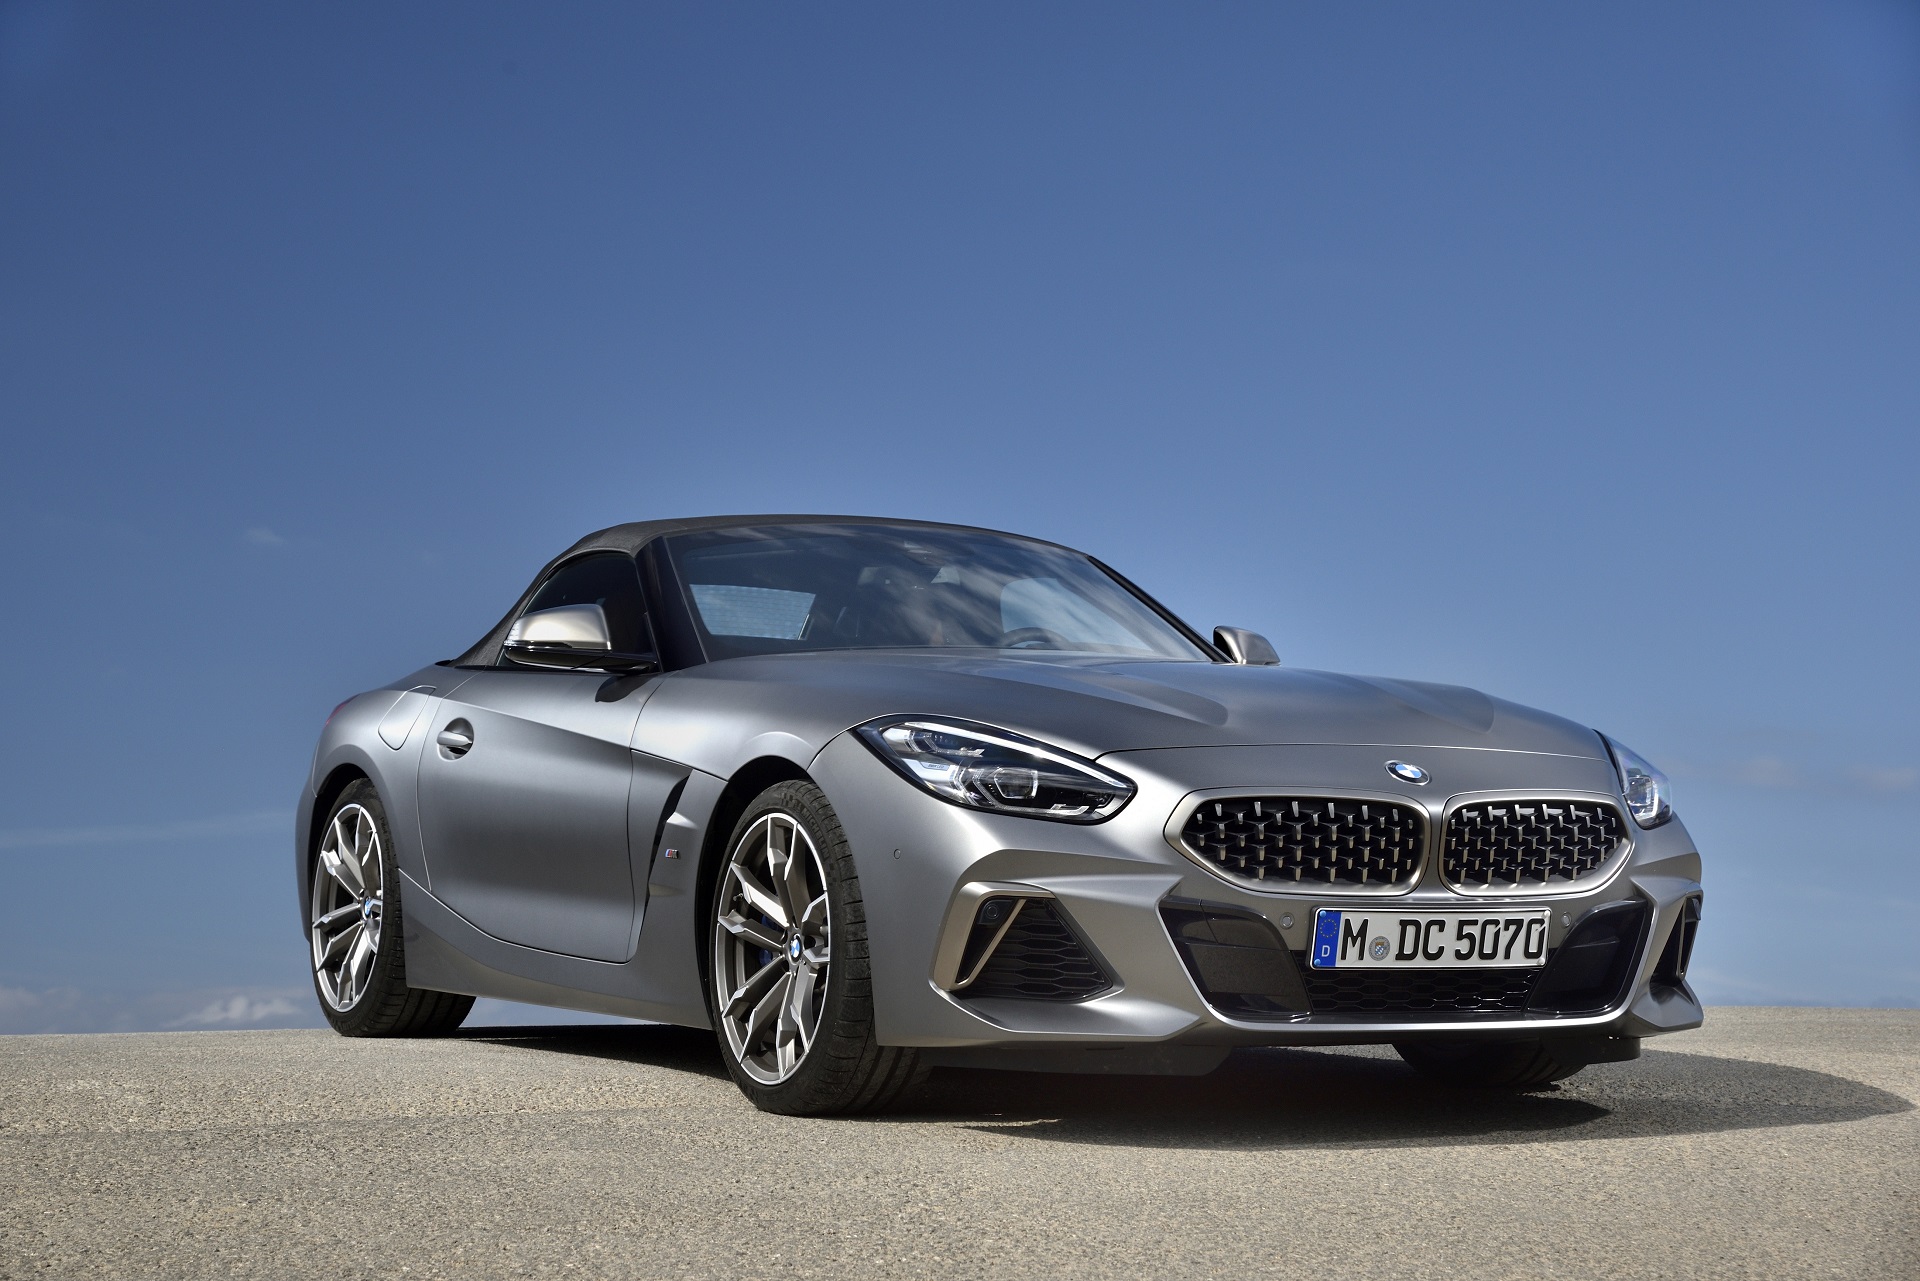 BMW Z4 Arrives In India With Prices Starting At Rs 64.9 Lakh | CarSaar